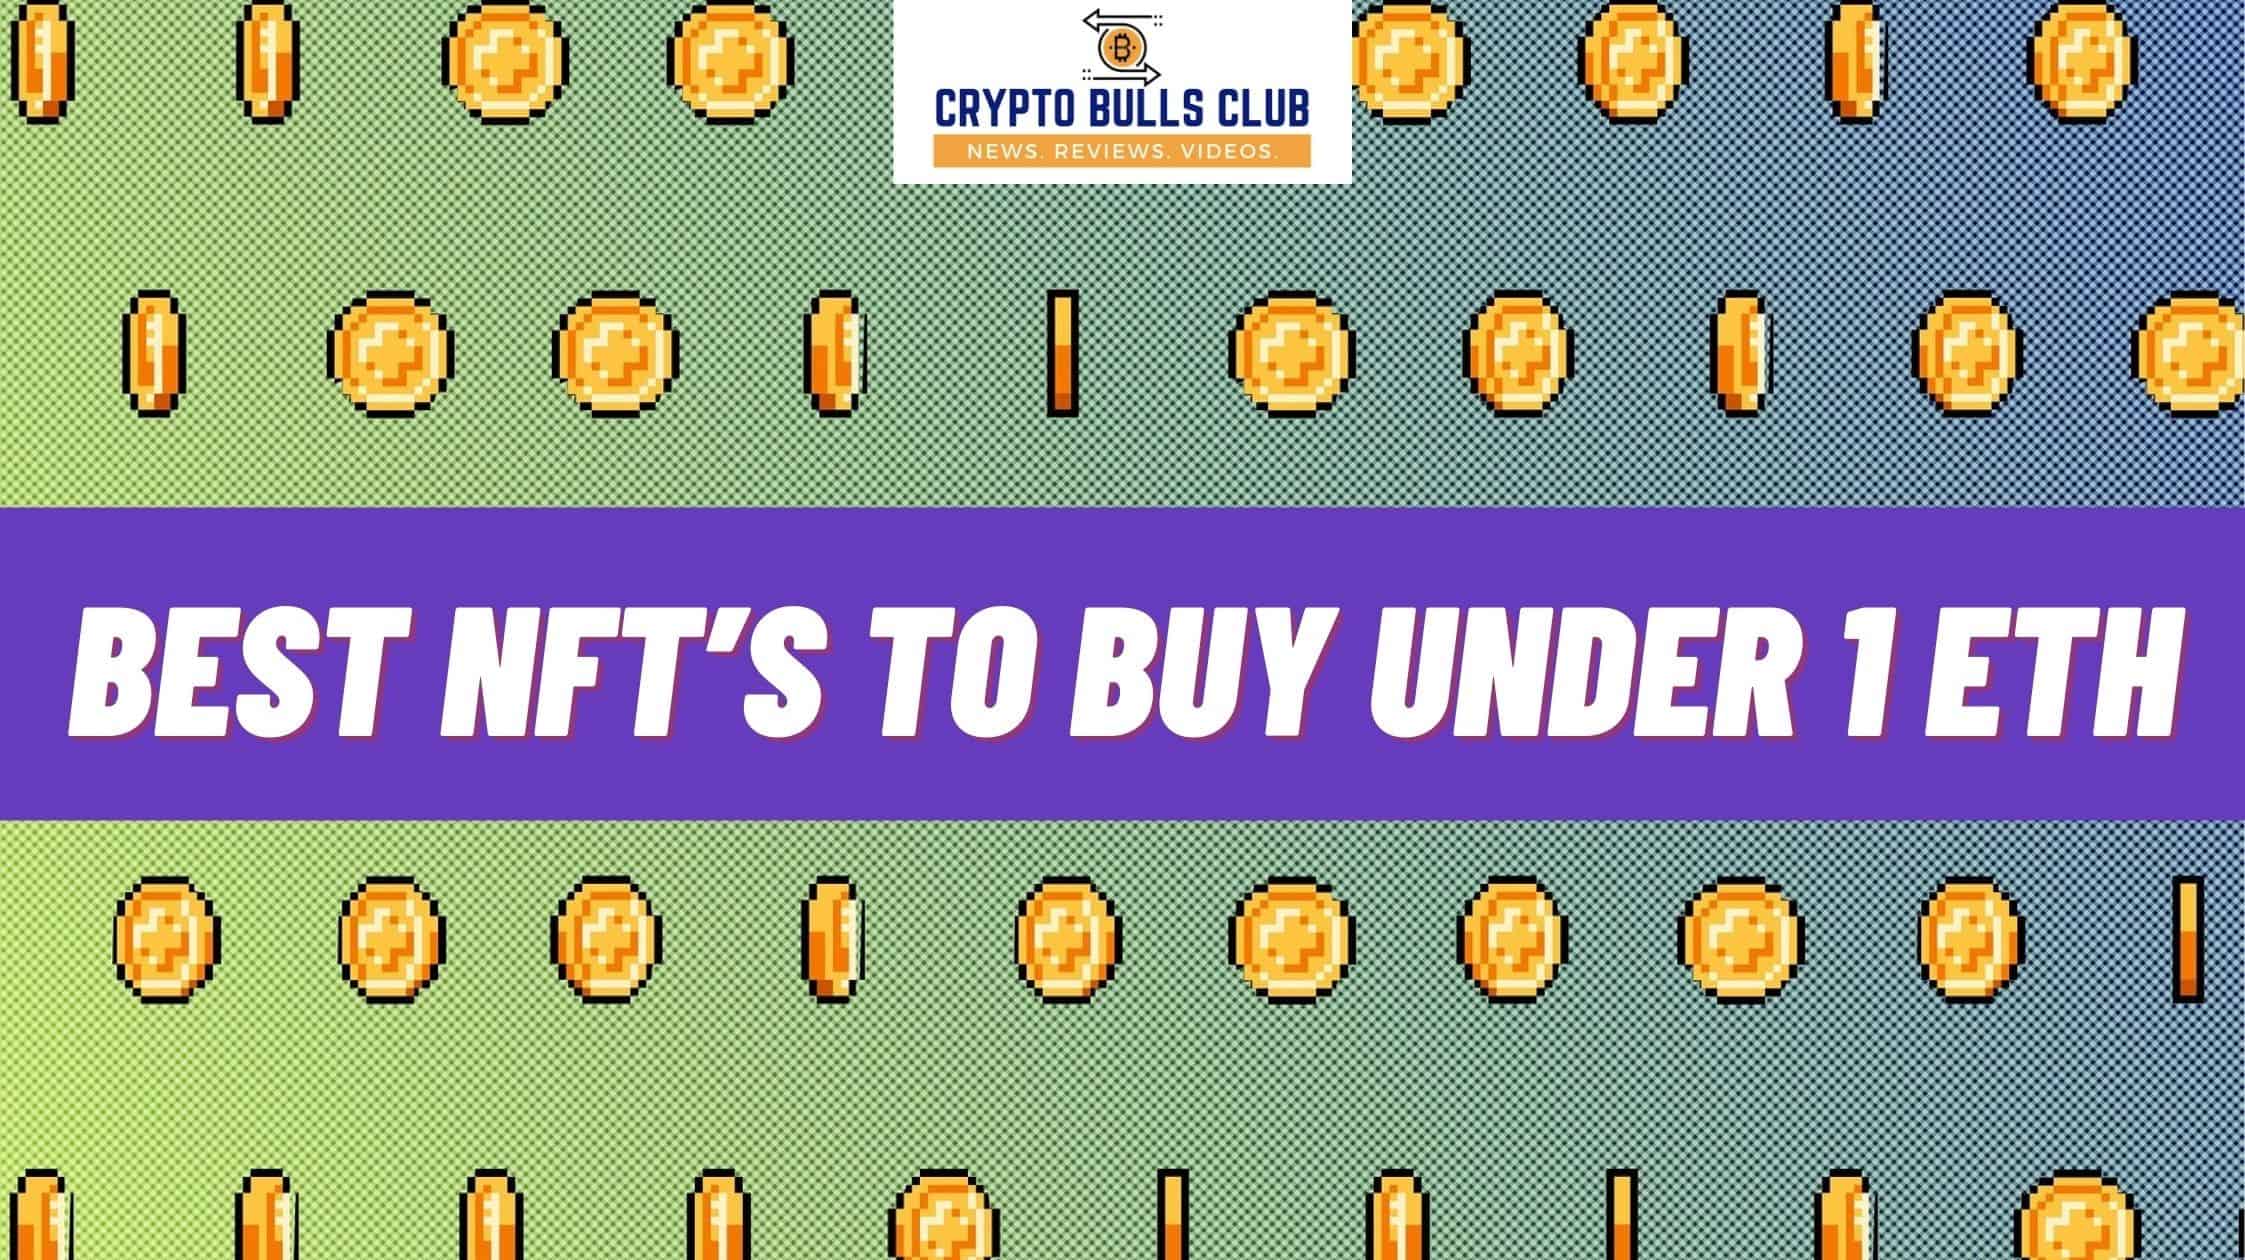 cryptos used to buy nfts